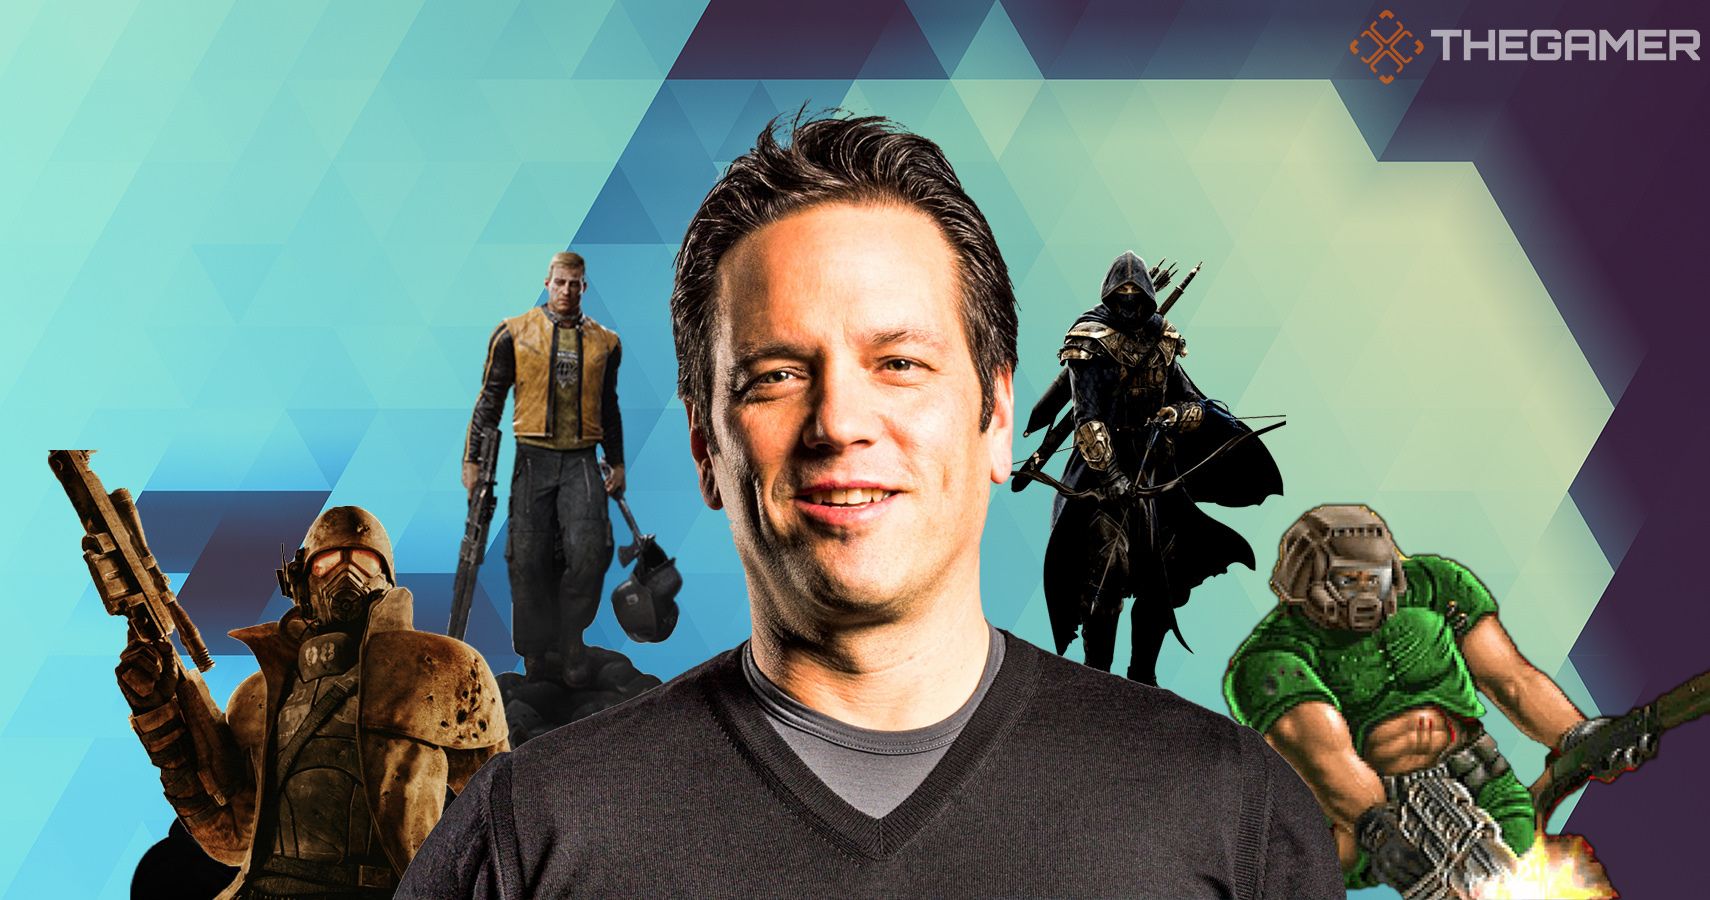 Phil Spencer discusses game exclusivity, first-party studios